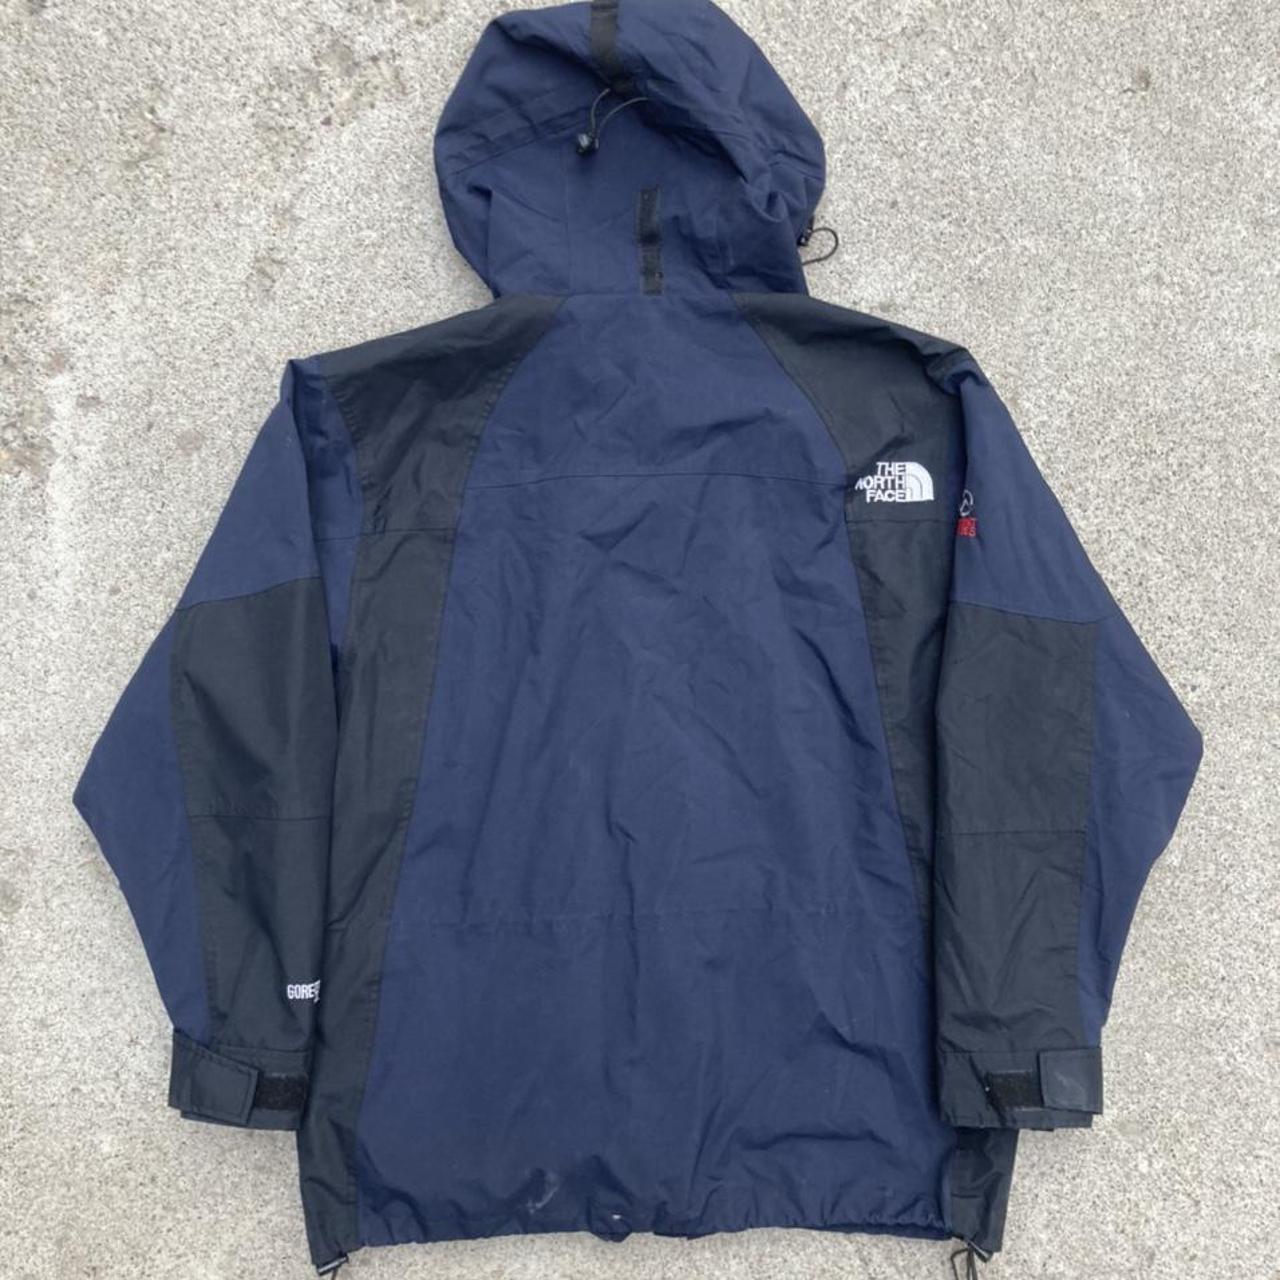 Product Image 2 - Gore-Tex North Face Jacket 🌨☔️💙
Winter